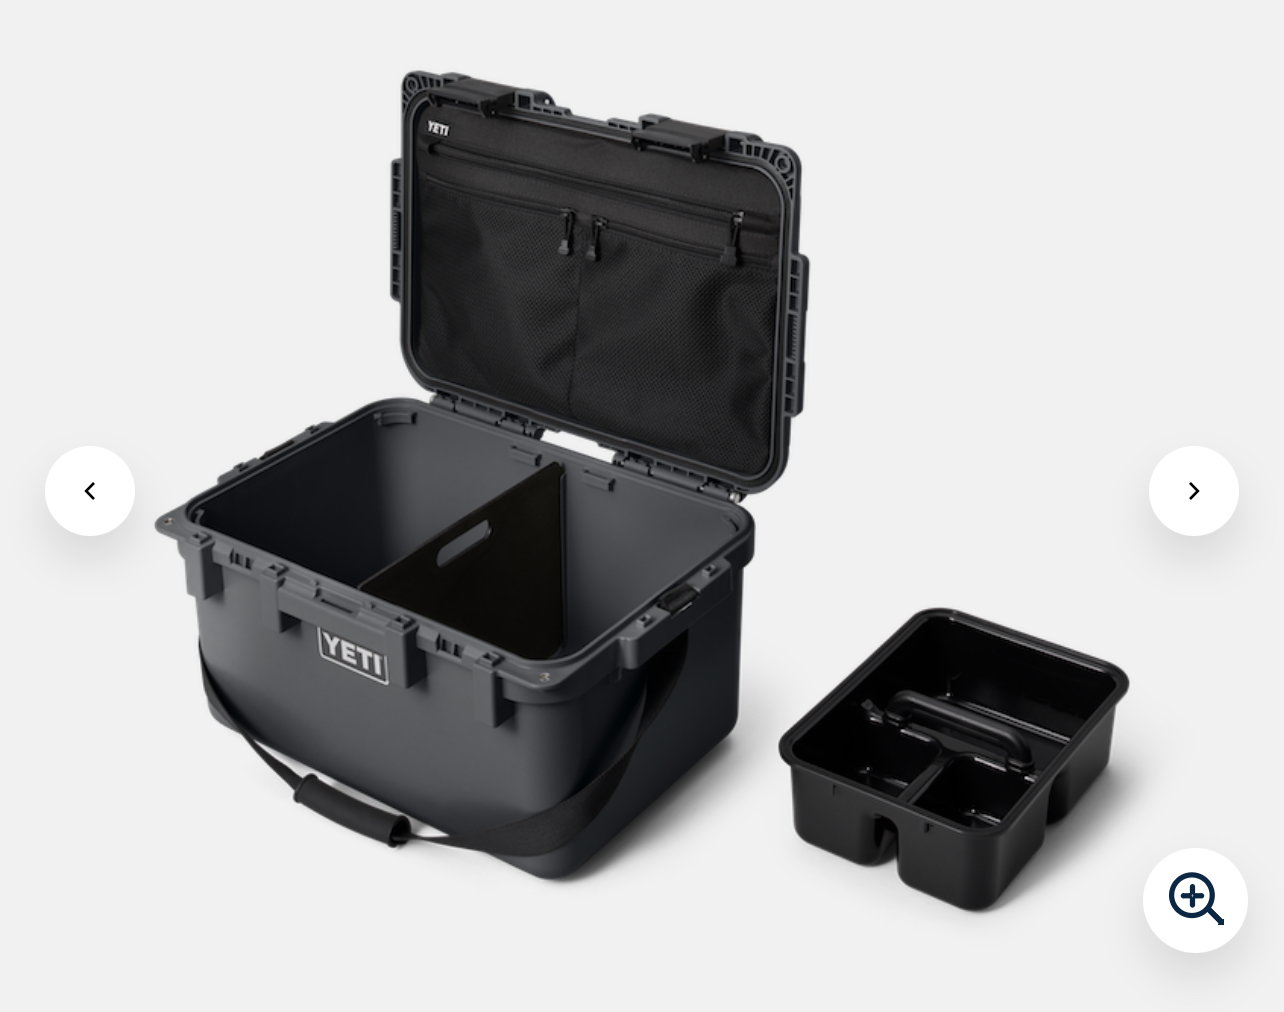 Yeti Go Box 30 - Offshore Tackle Storage - The Hull Truth